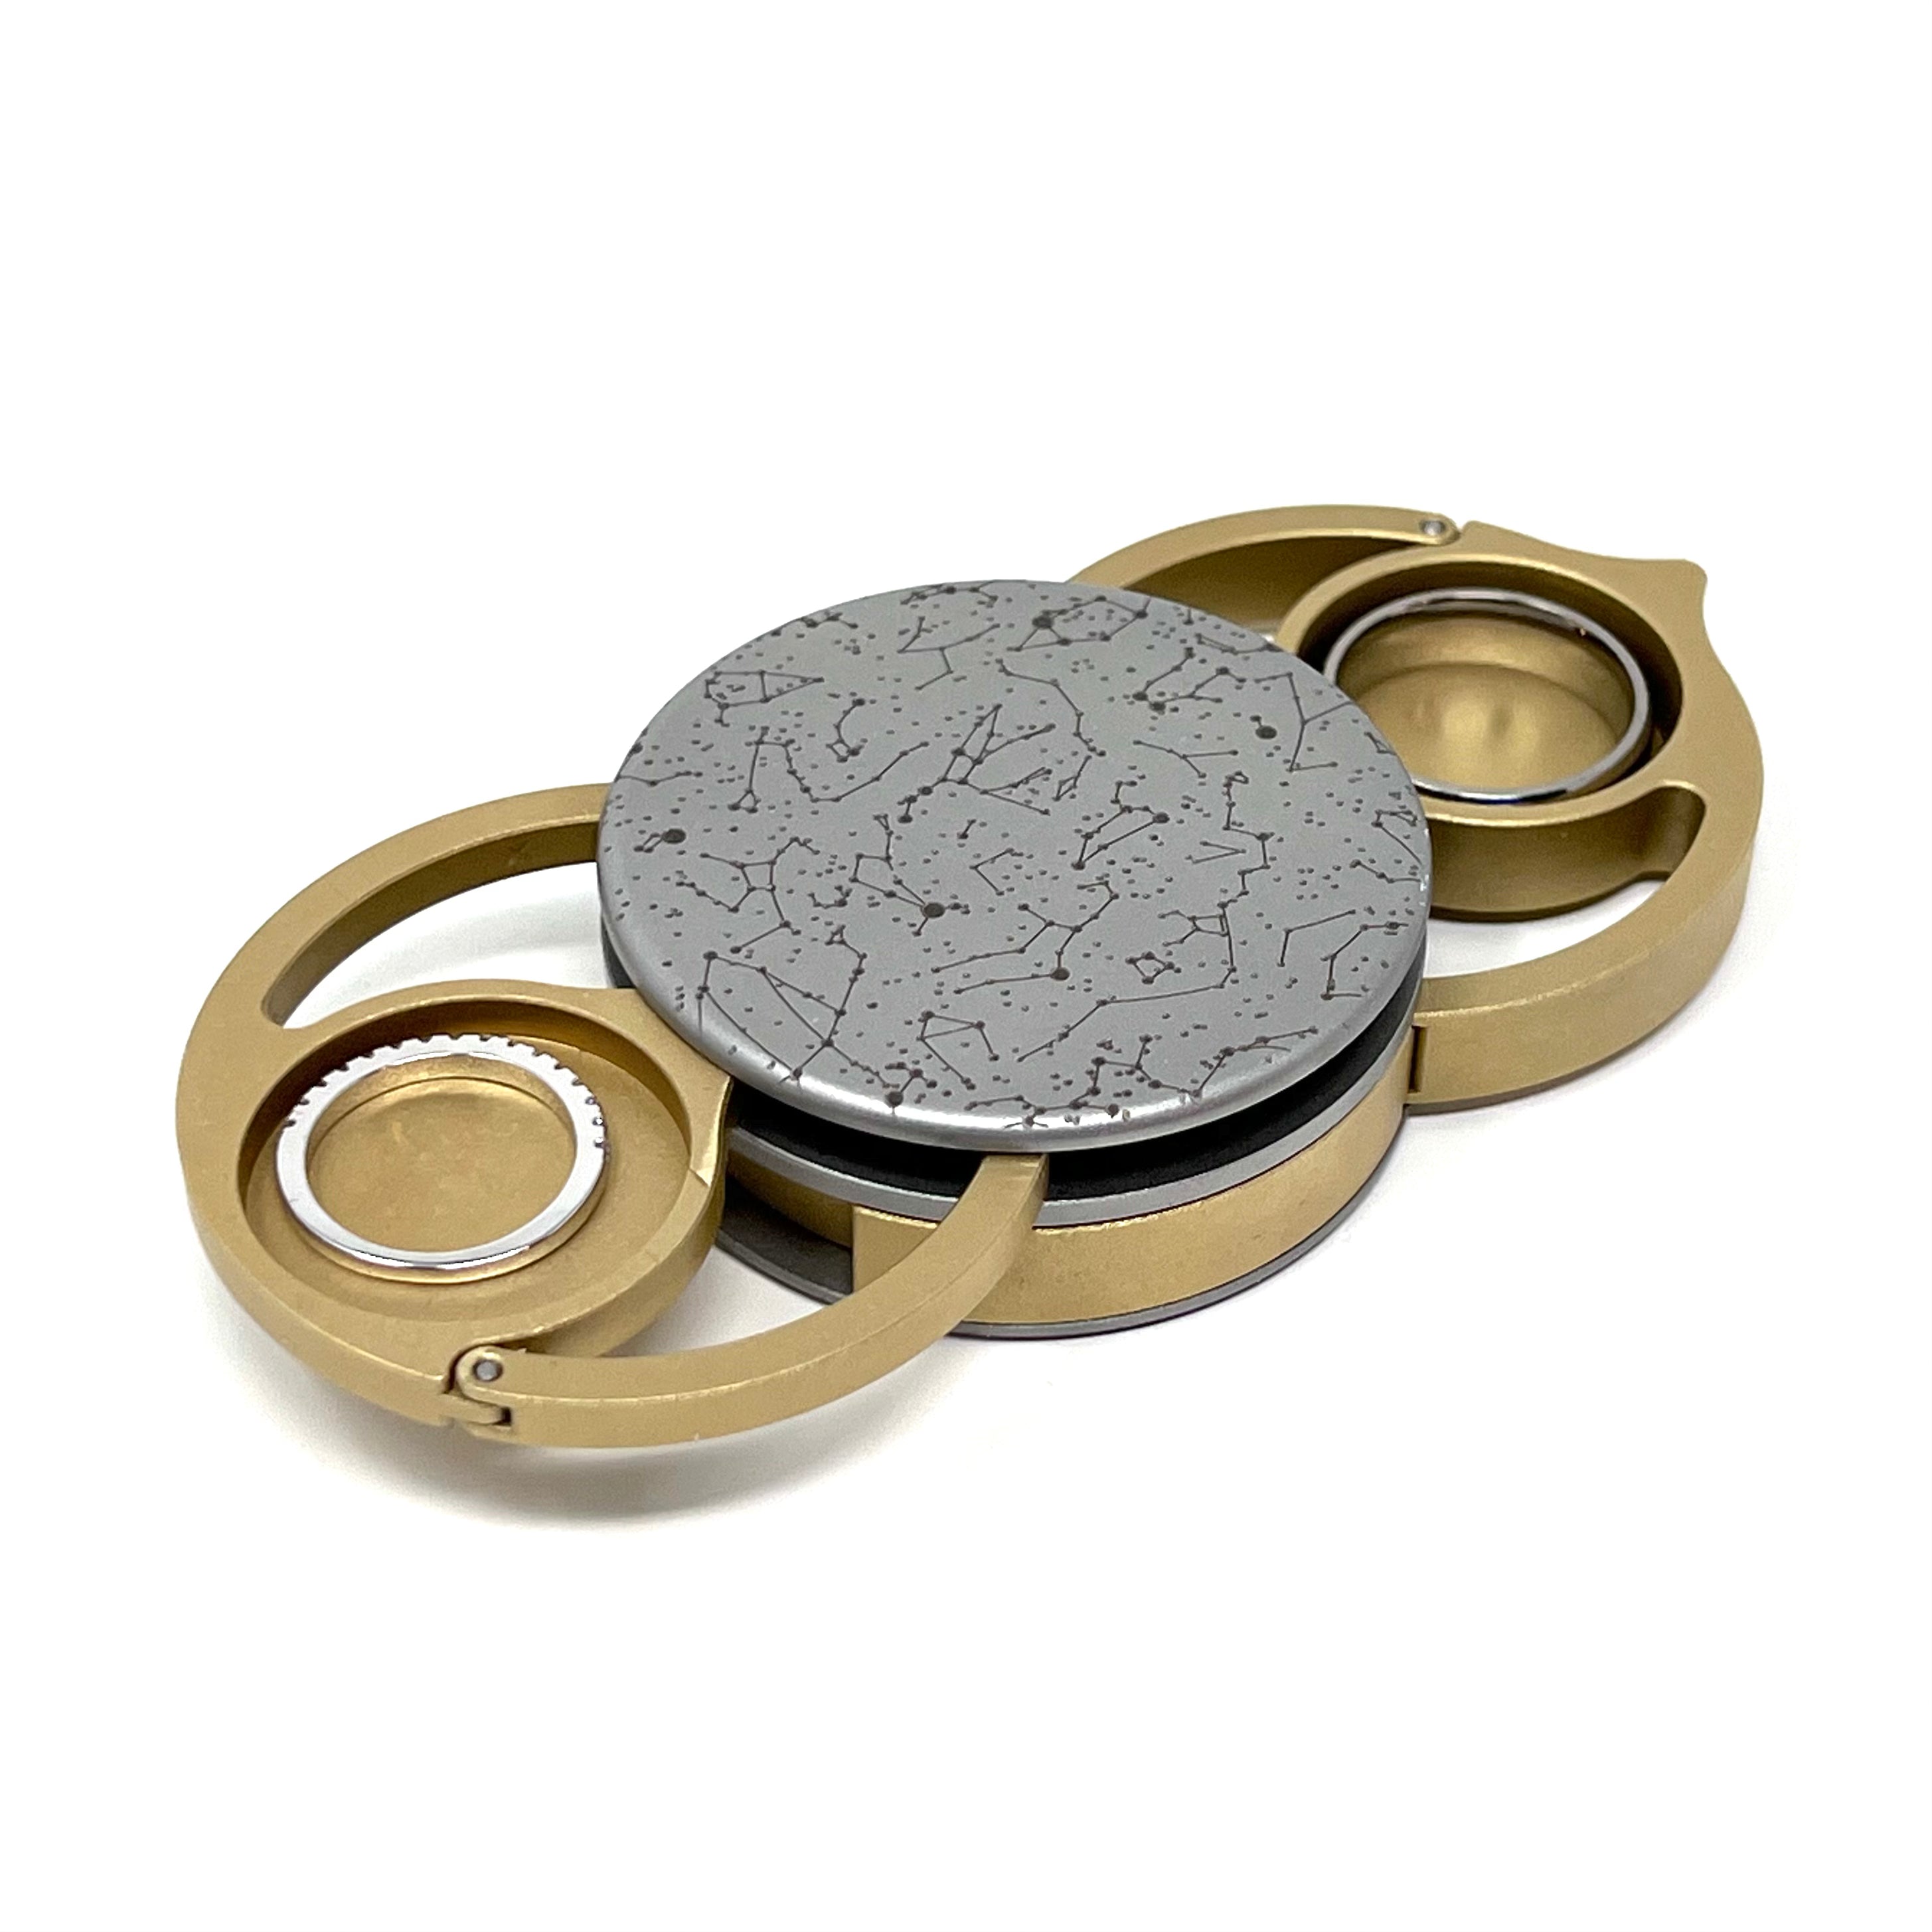 First Limited Edition Kinetadisc Duo Ring Box